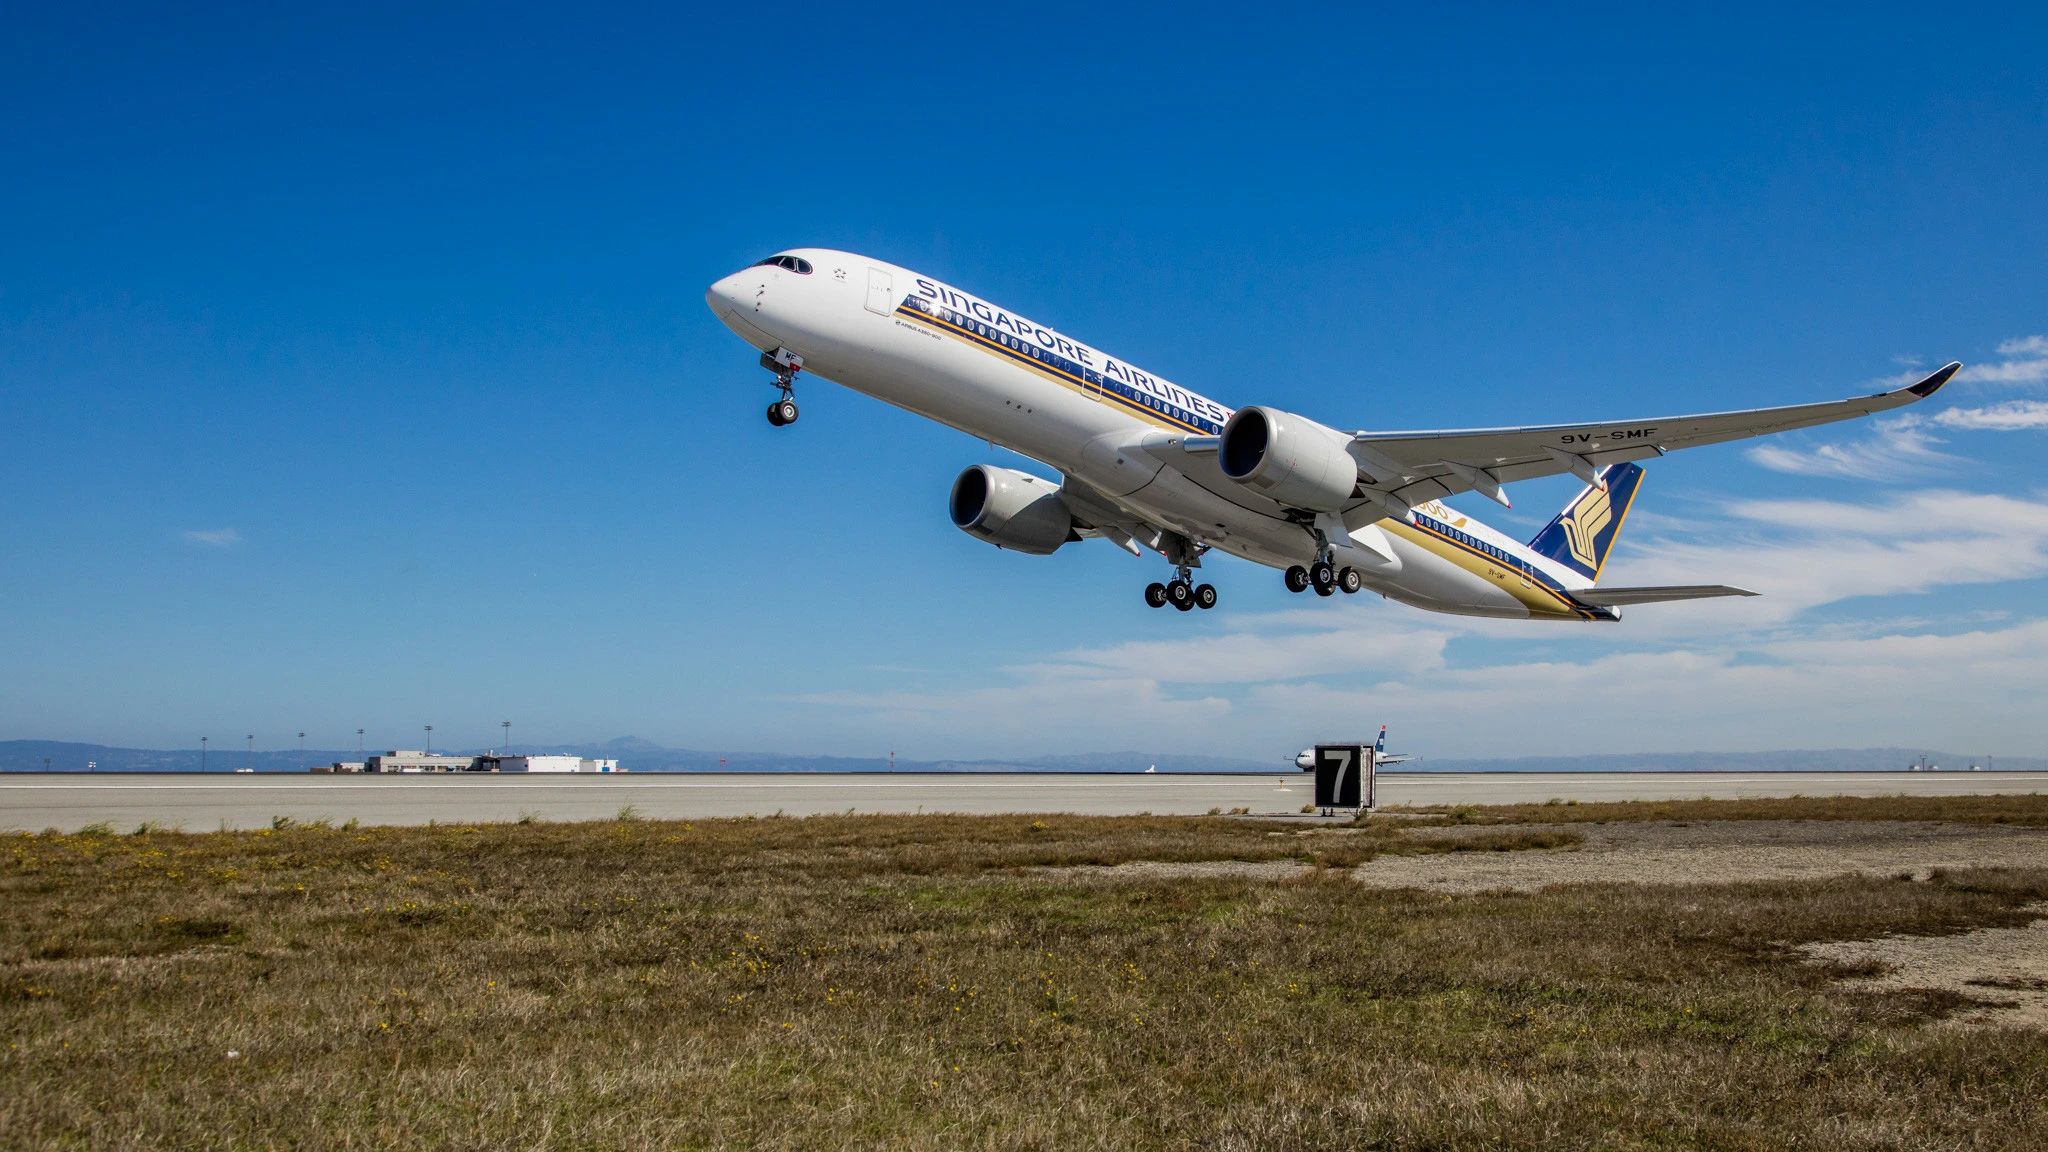 A Singapore Airlines A350 departing SFO.